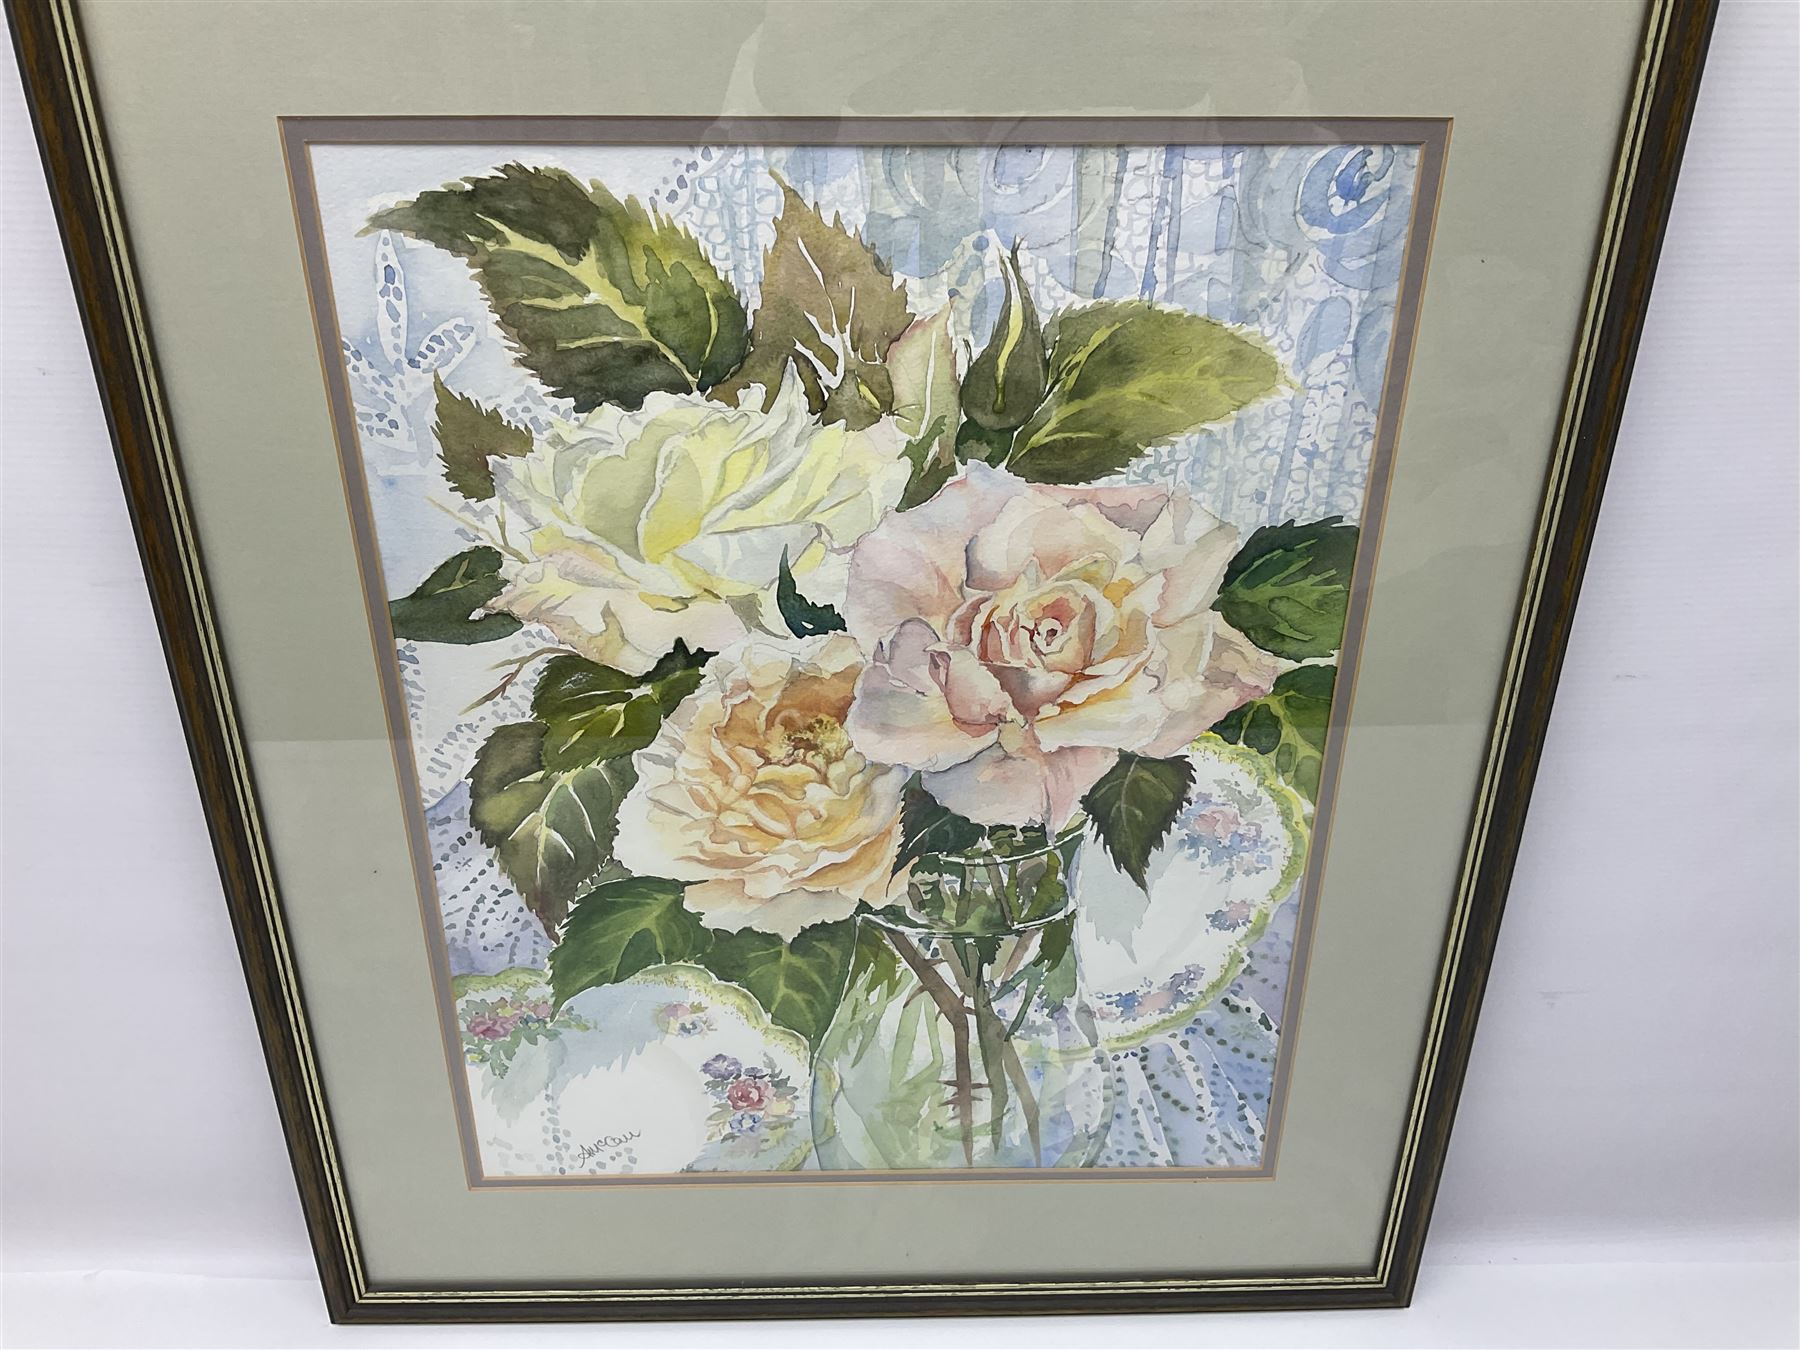 Angela McCall: 'Last of the Summer Roses' - Image 3 of 5